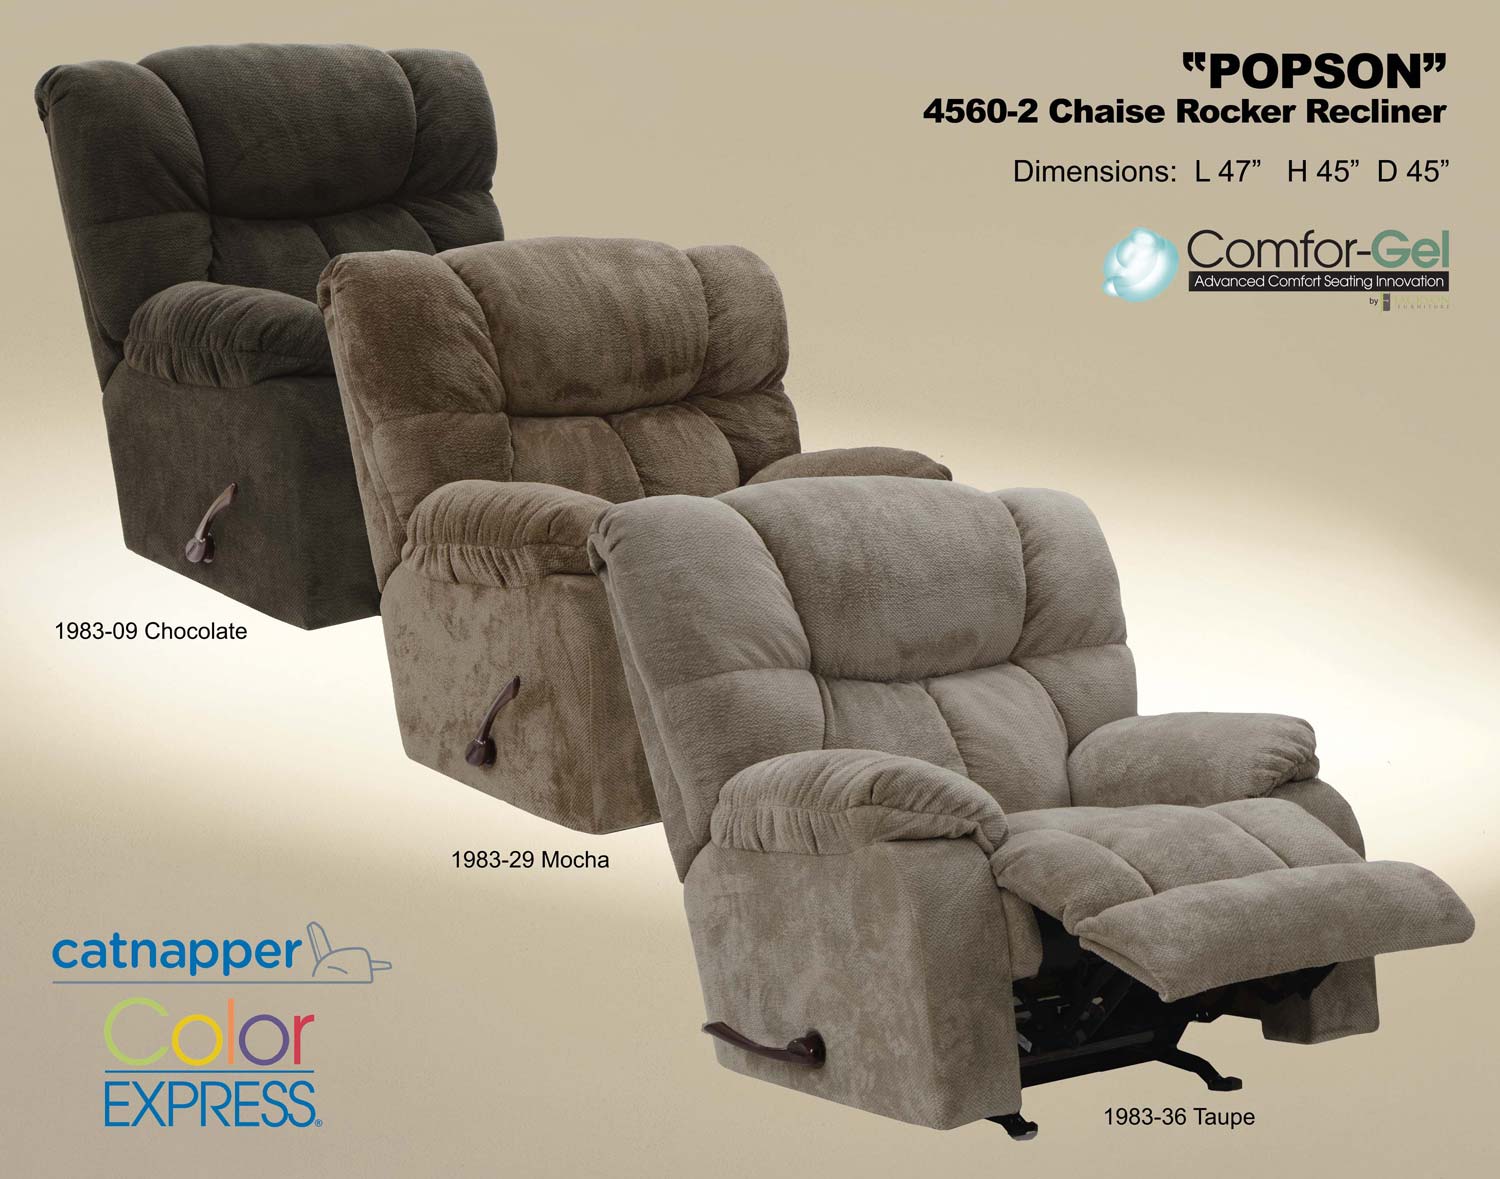 CatNapper Popson X-tra Comfort Chaise Rocker Recliner - Taupe